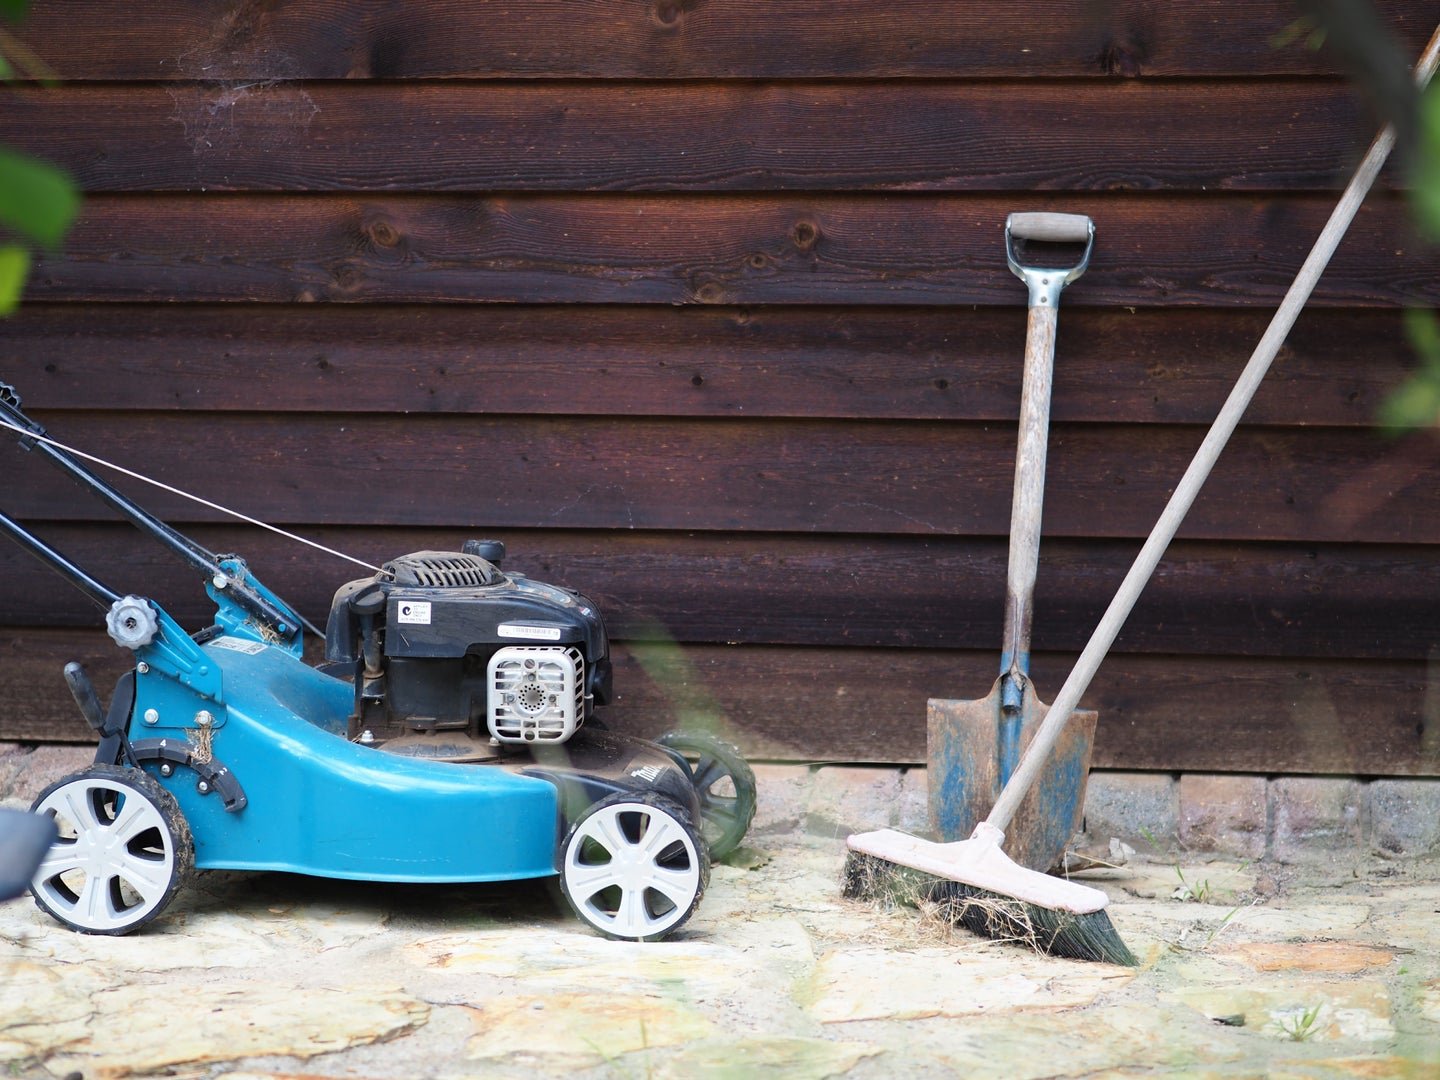 It’s time to rip up your lawn and replace it with something you won’t need to mow